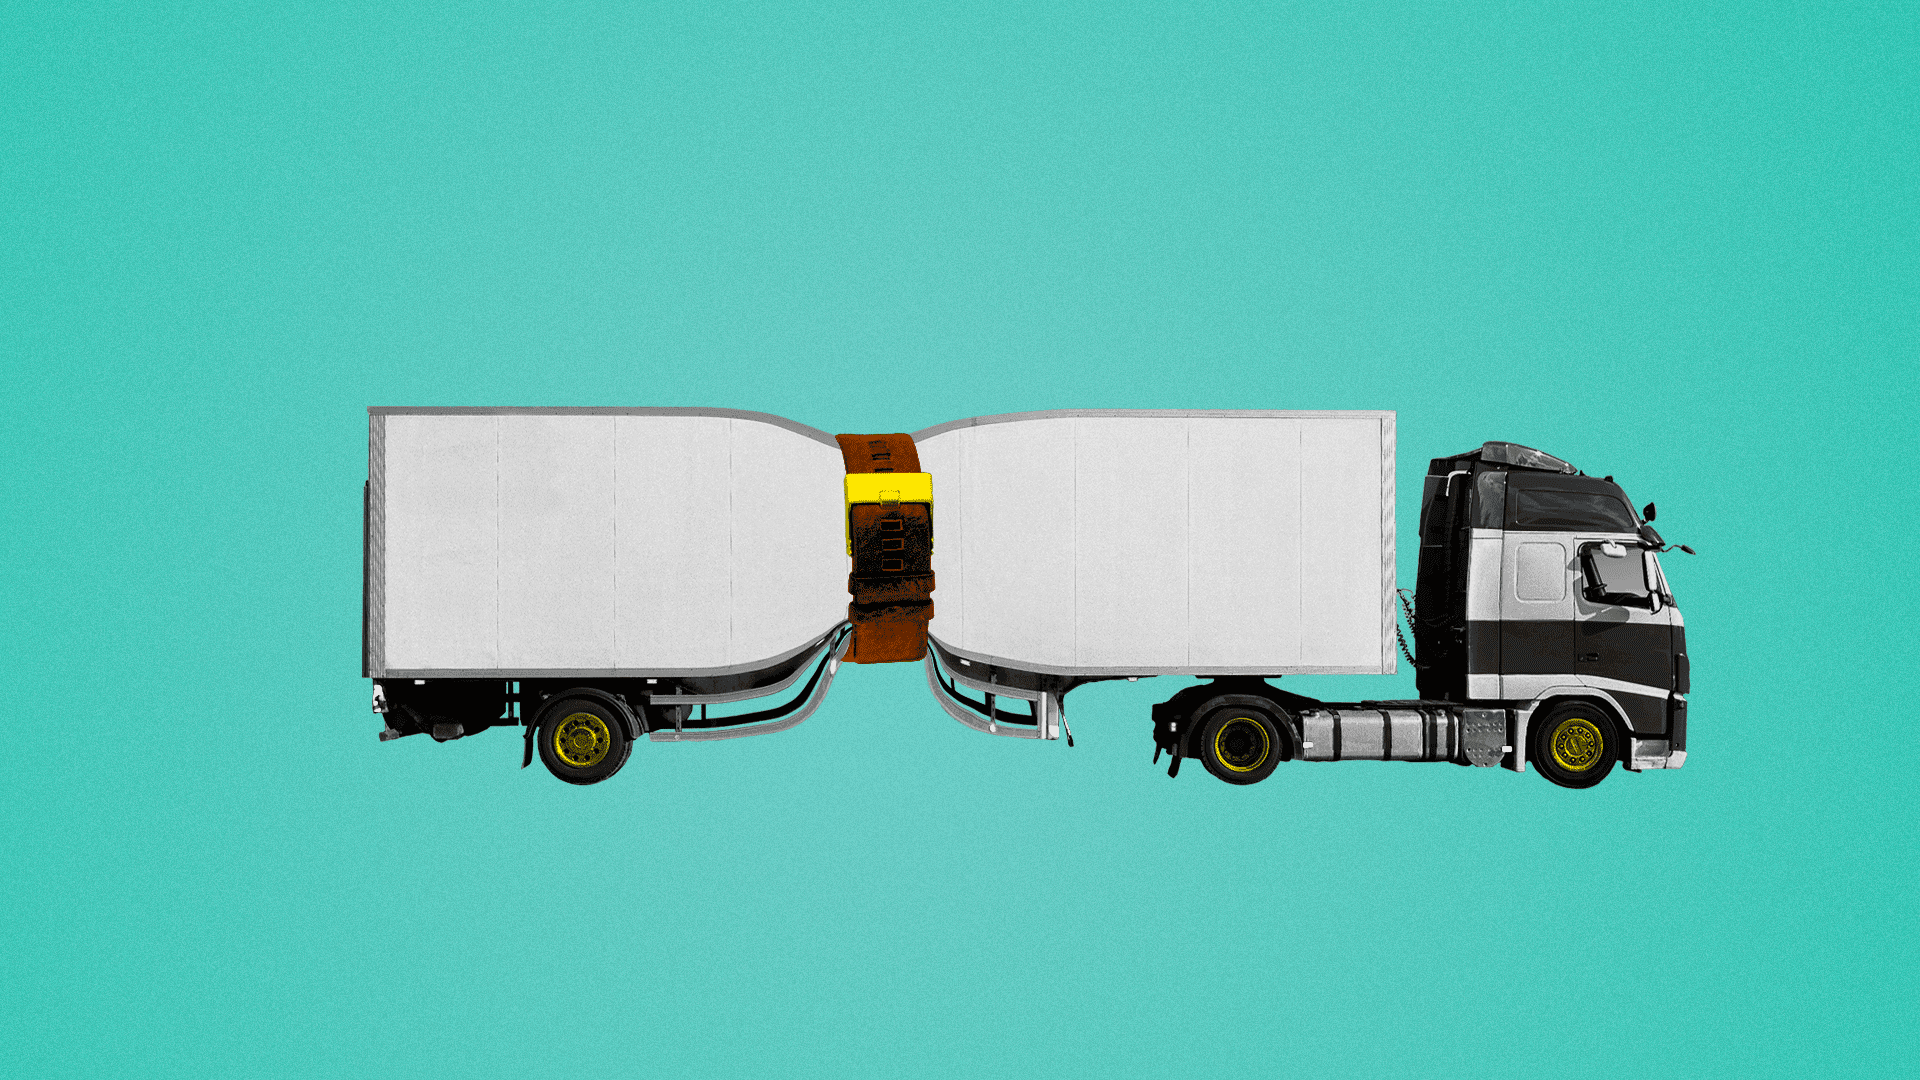 An illustration of a truck being tied down.